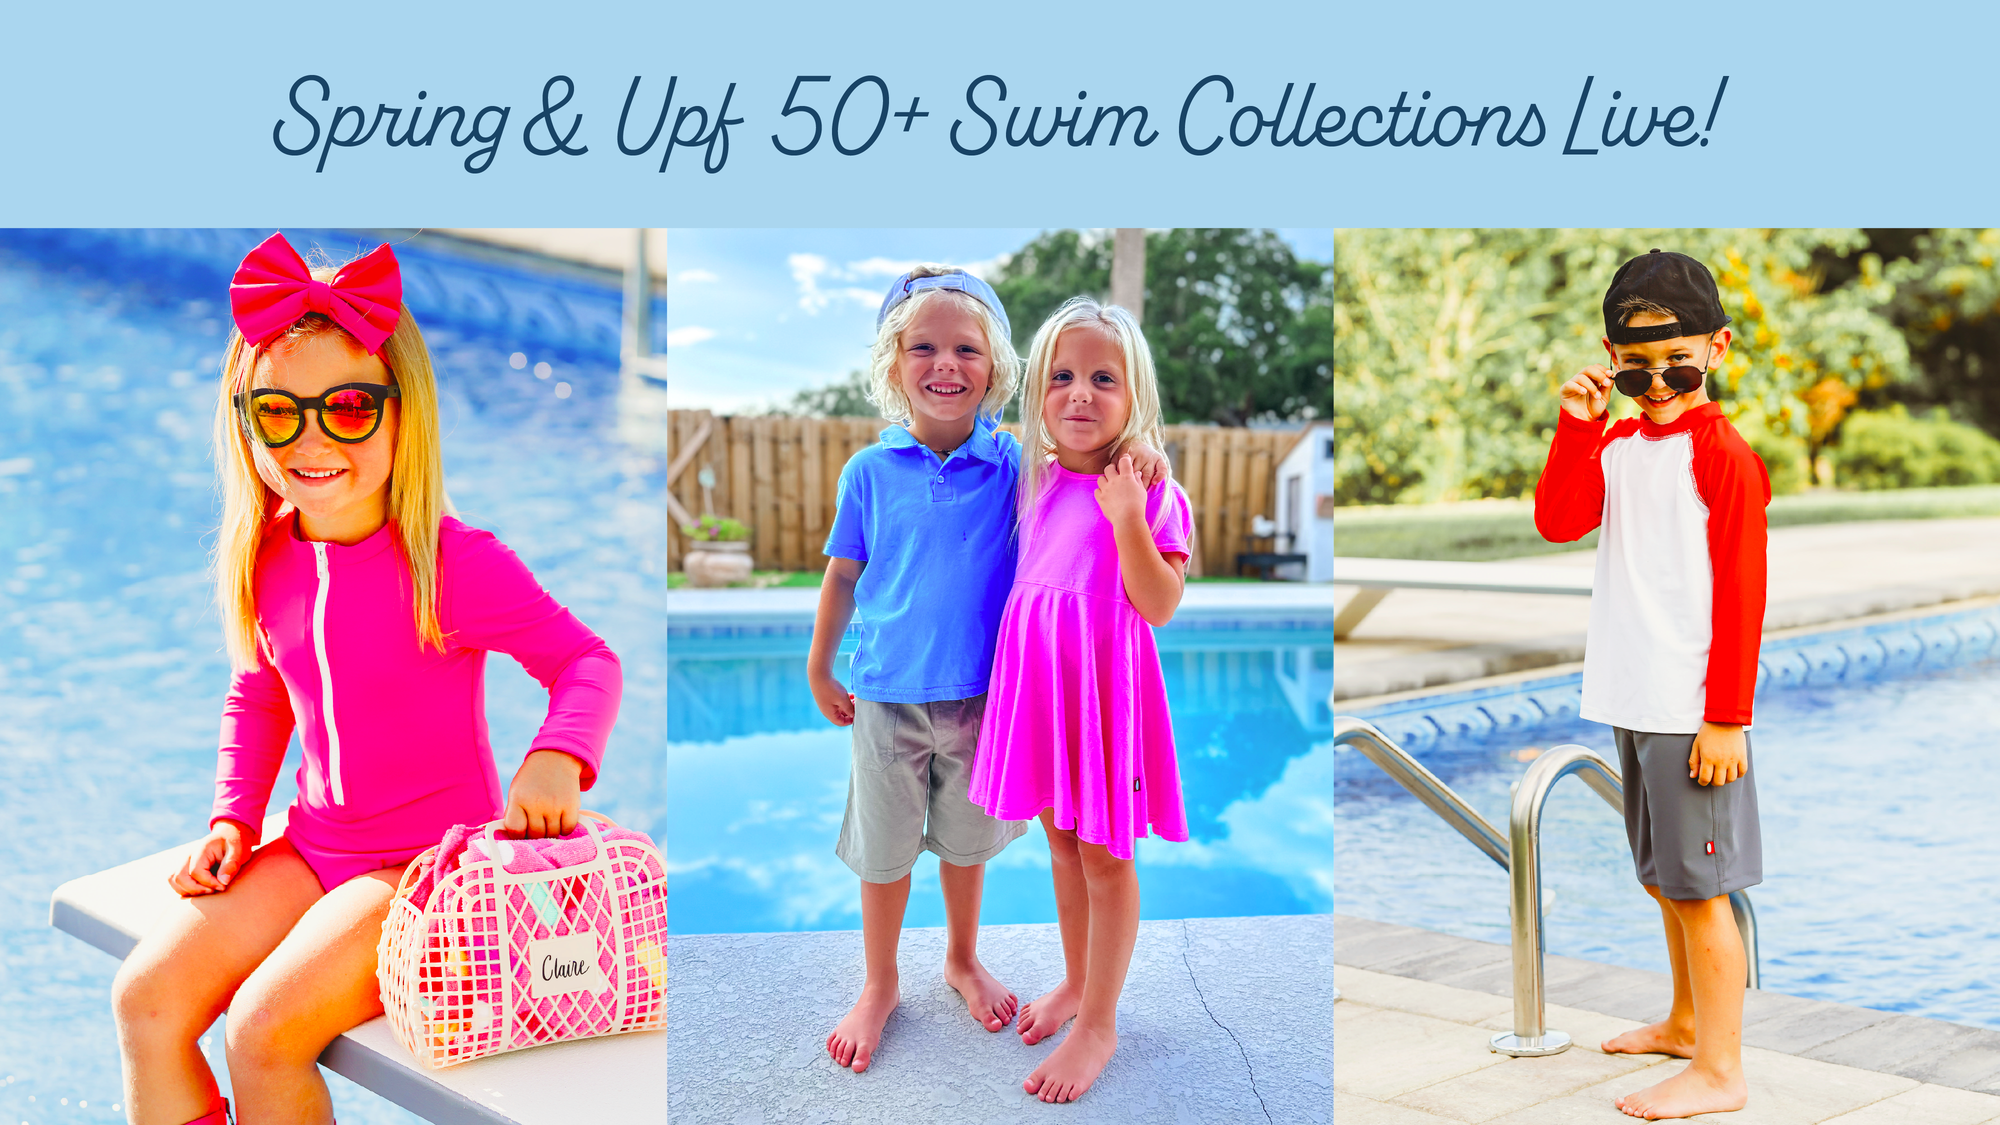 Kids standing by a pool in comfortable Spring clothing and swimwear